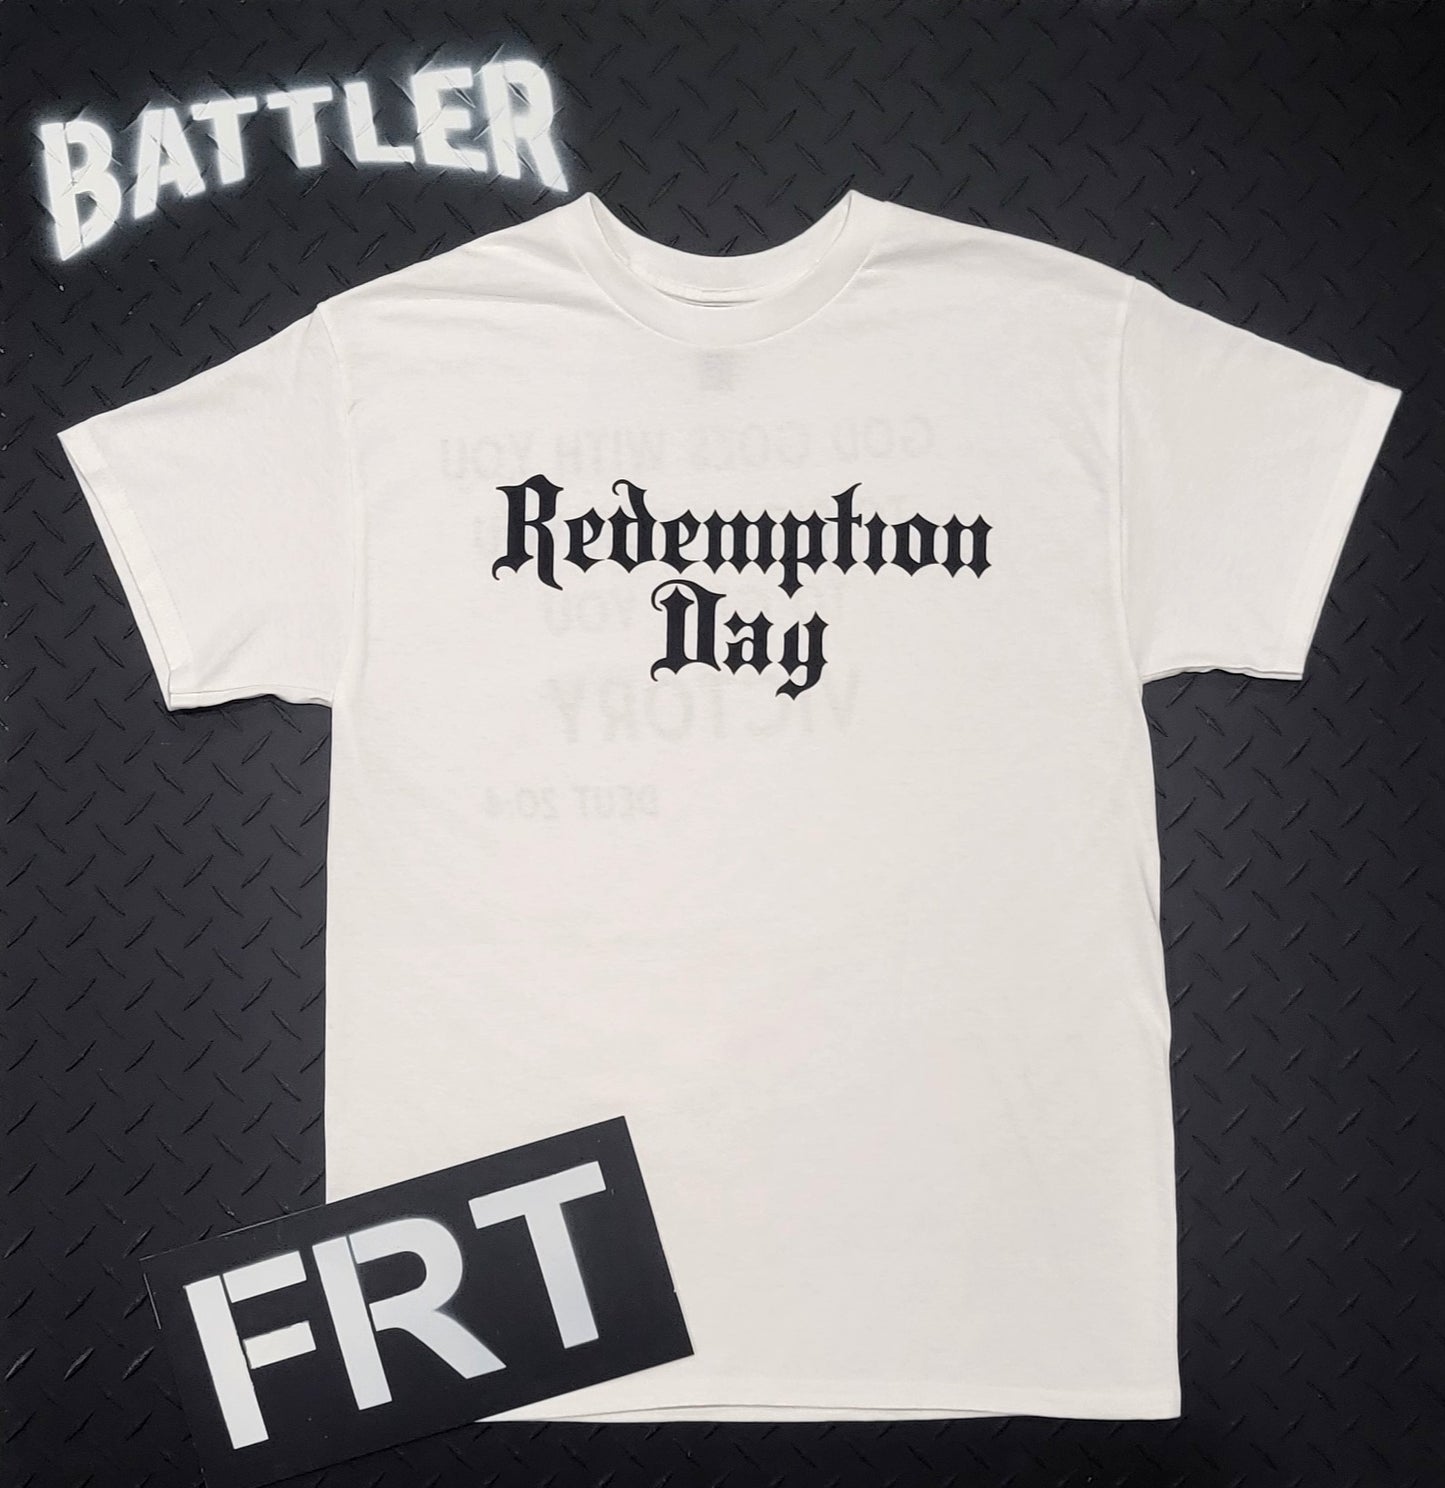 Double-Sided Redemption Day / Deut 20:4 Tee (Black on White)